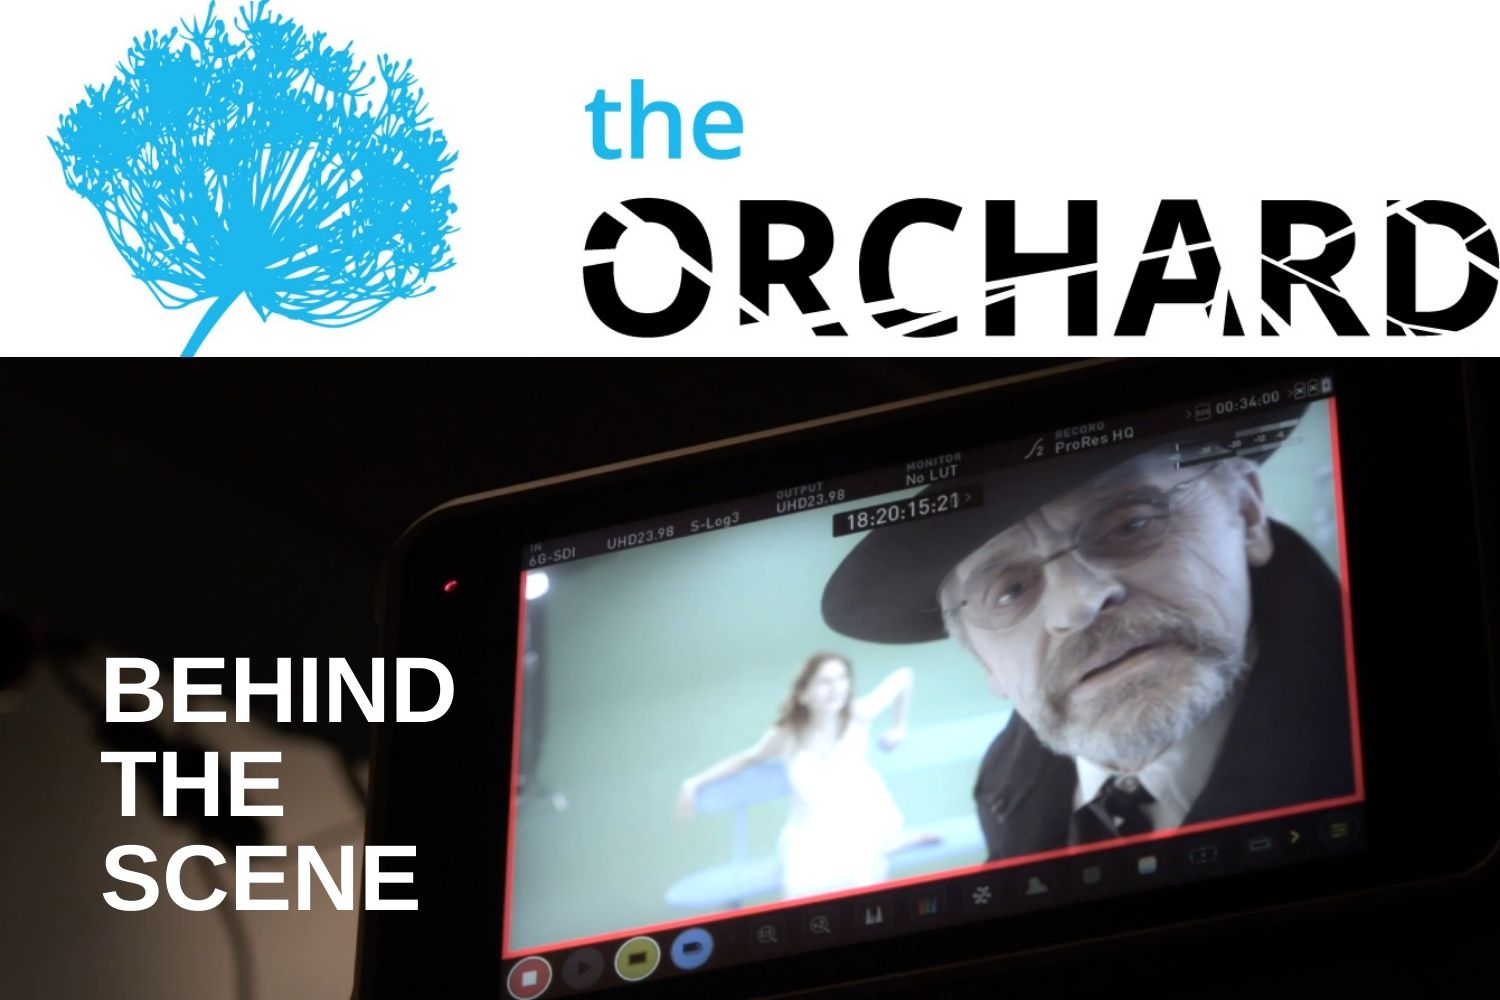 The Making of THE ORCHARD Virtual Experience